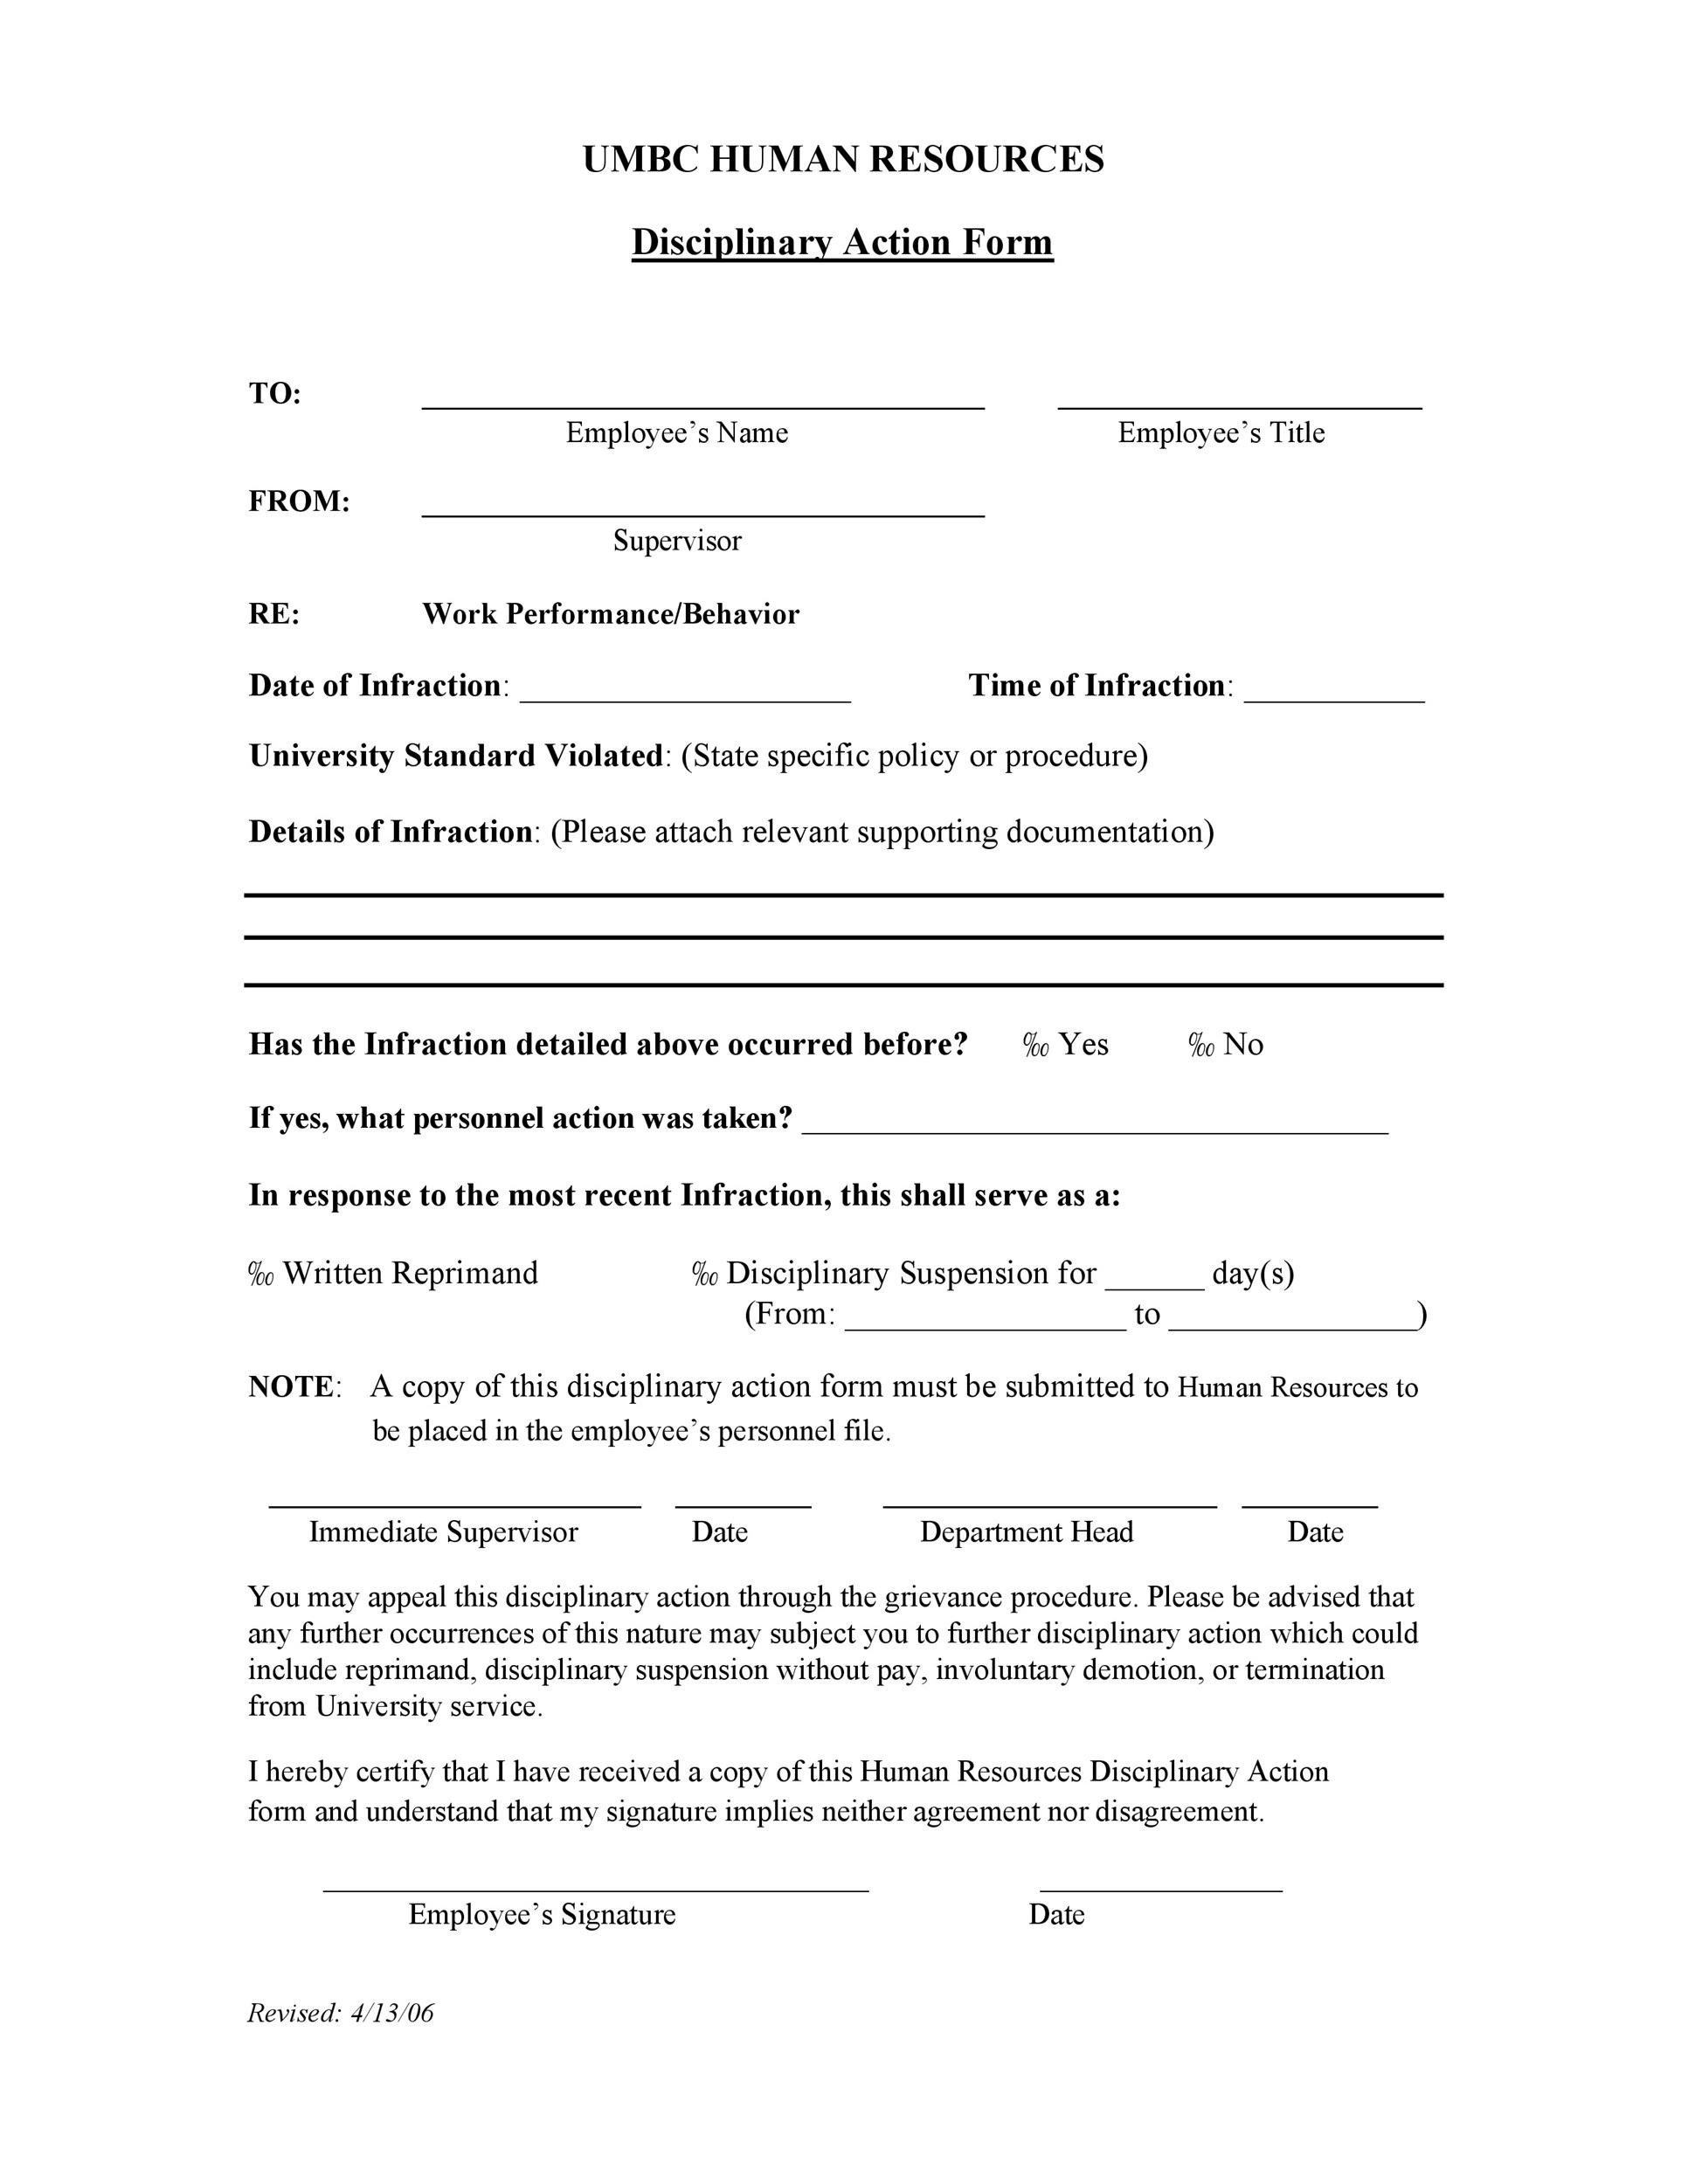 Free Disciplinary Action Form 17